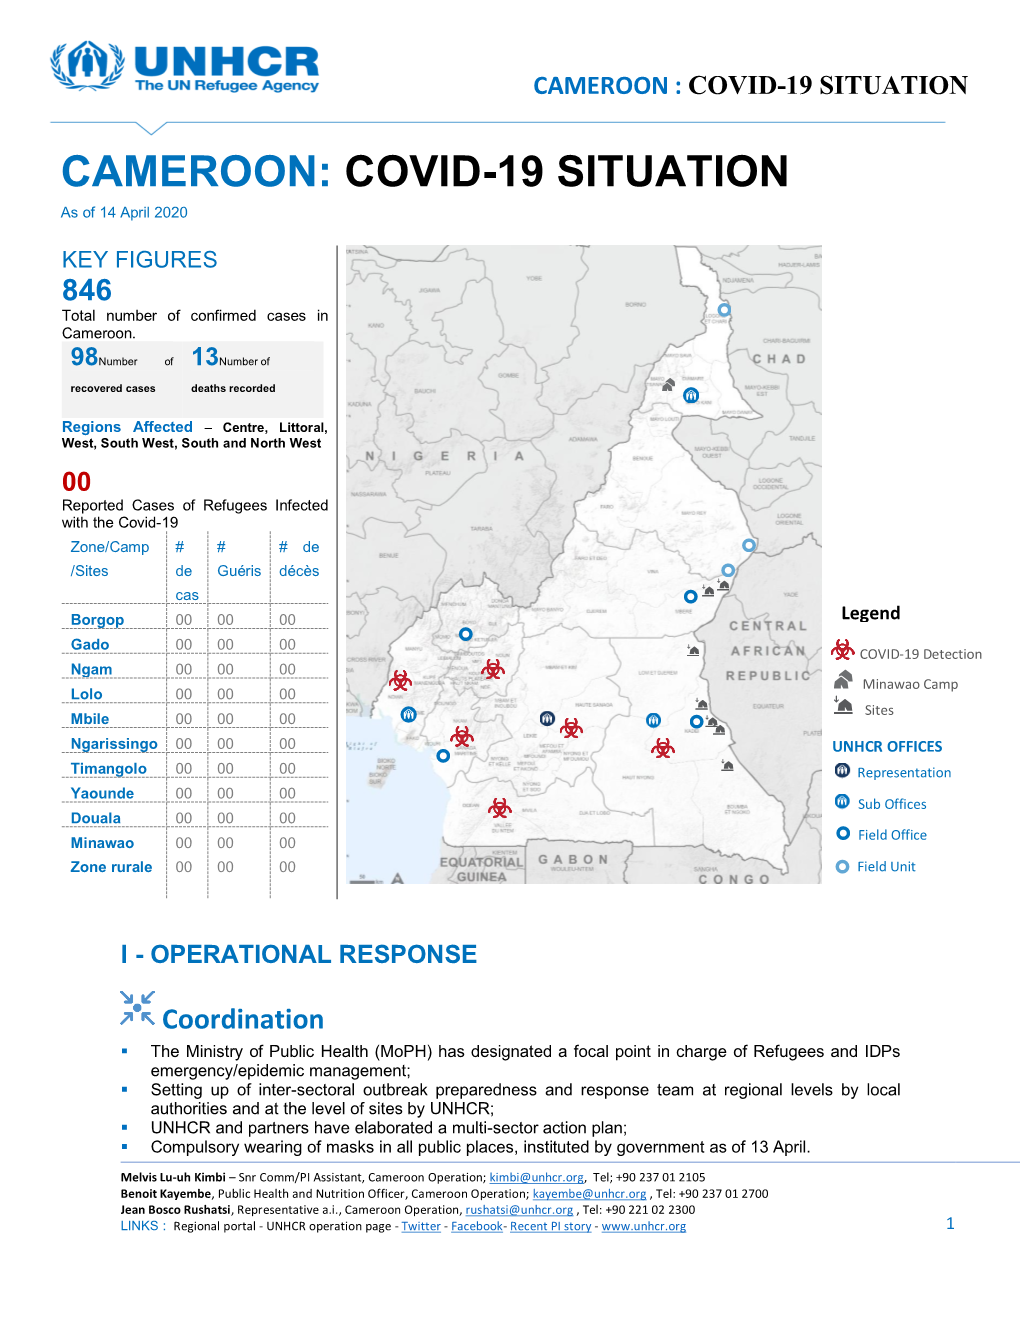 CAMEROON: COVID-19 SITUATION As of 14 April 2020